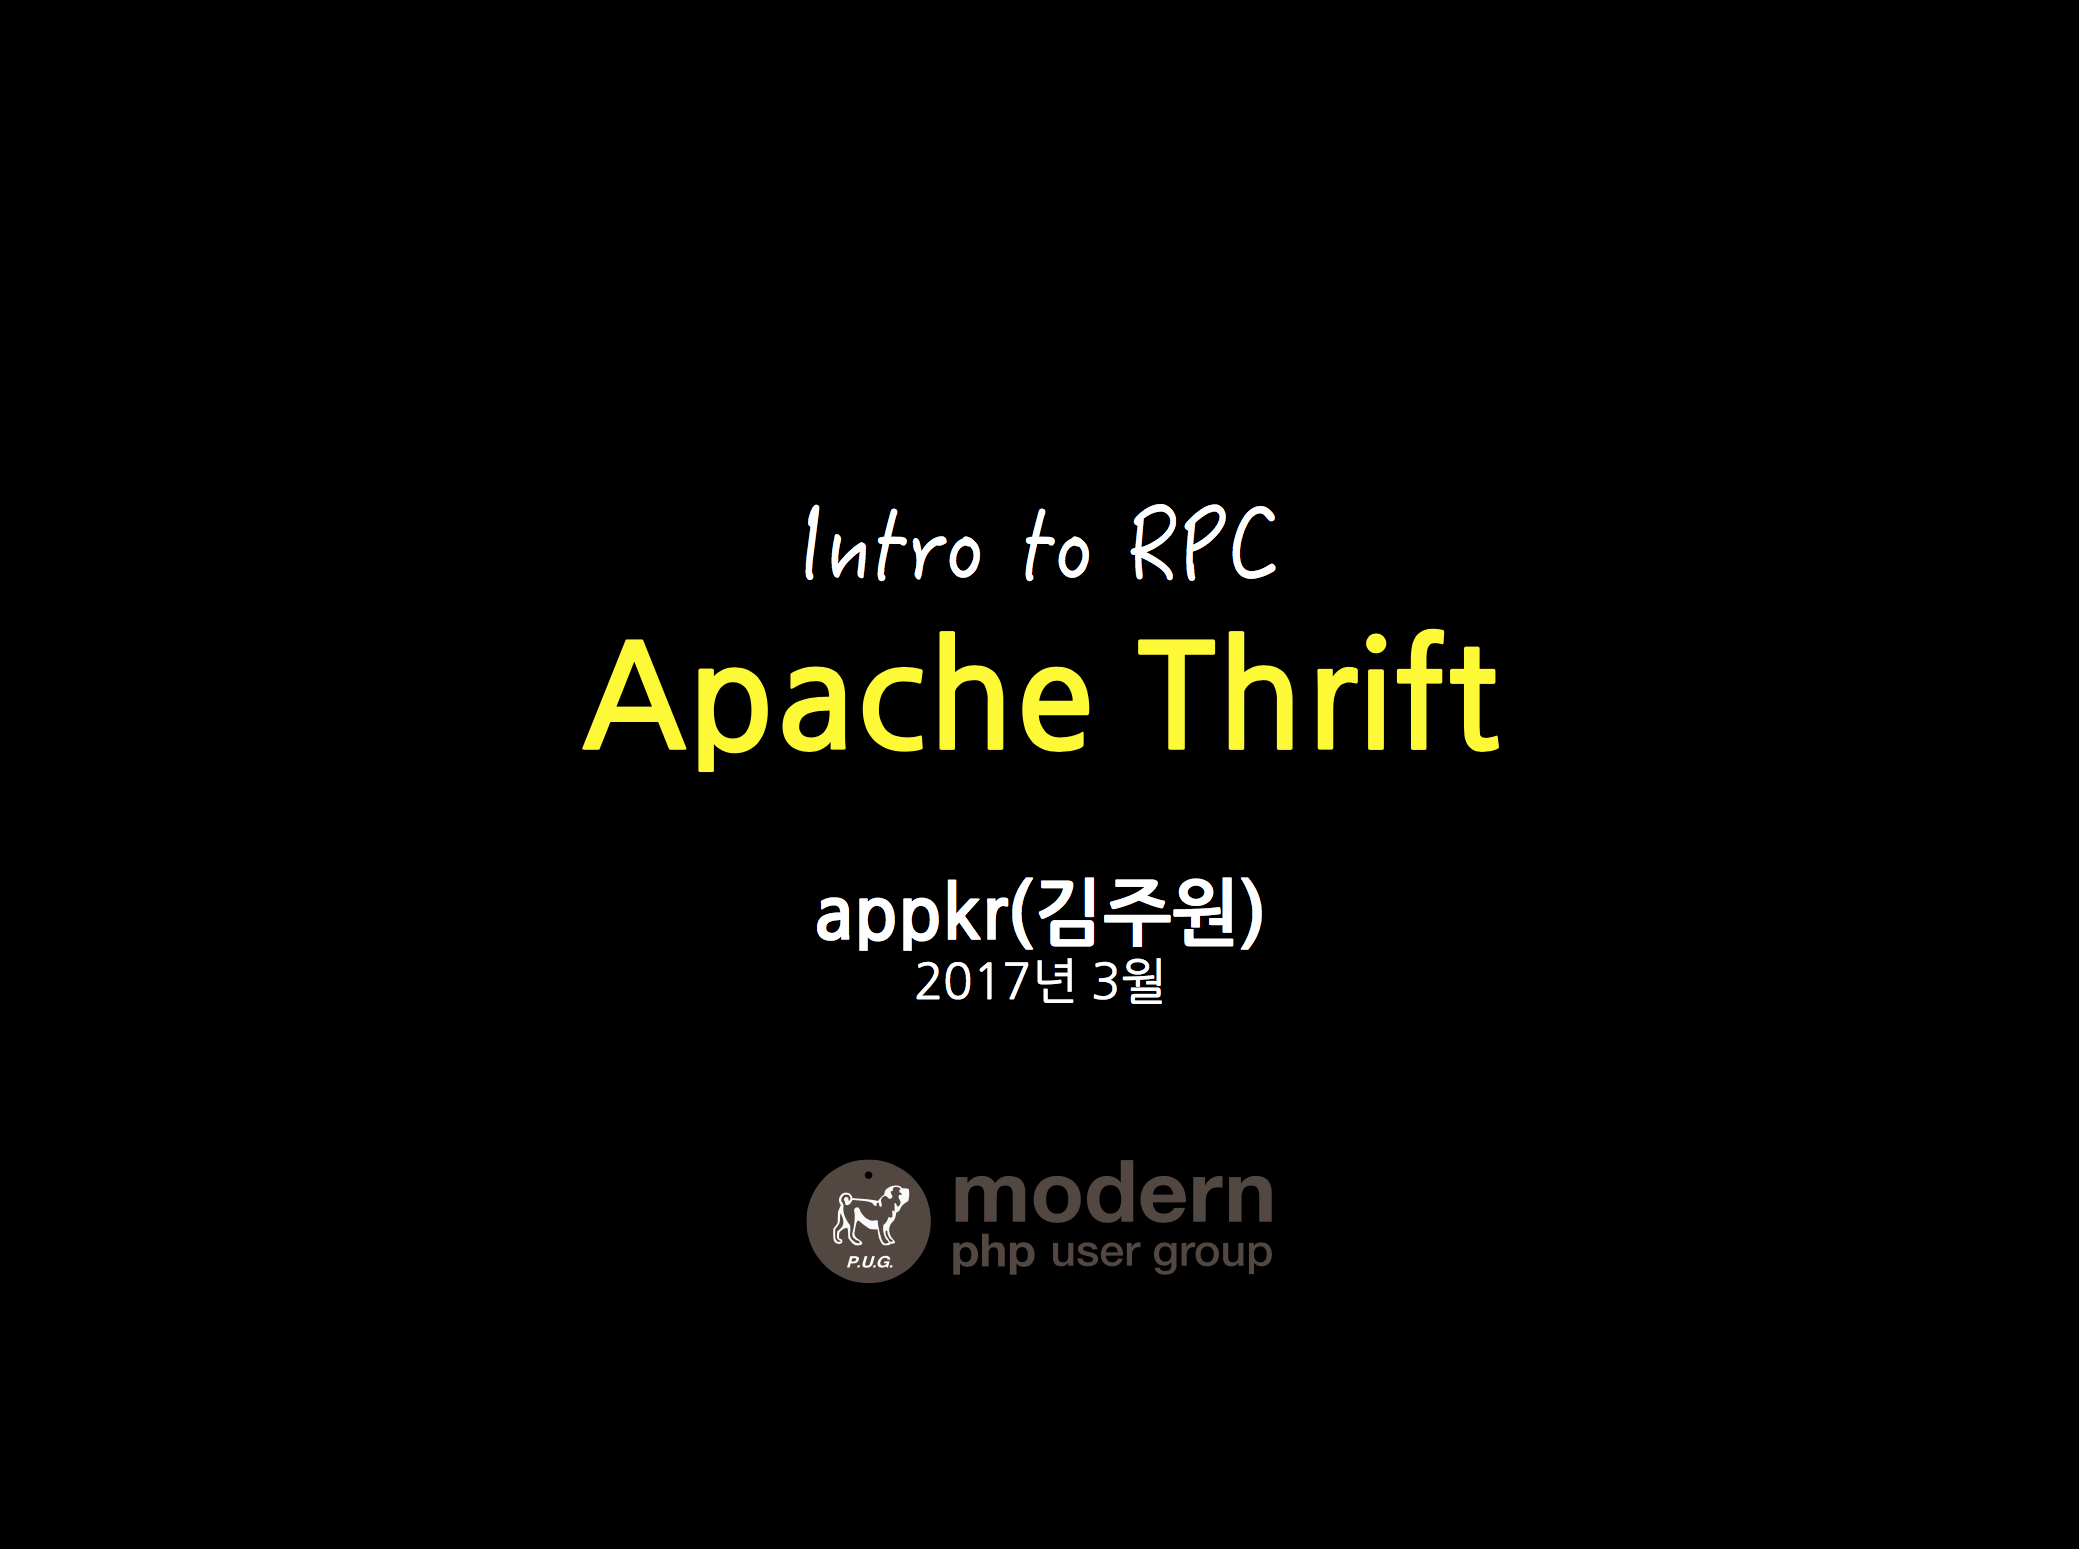 Intro to RPC - Apache Thrift